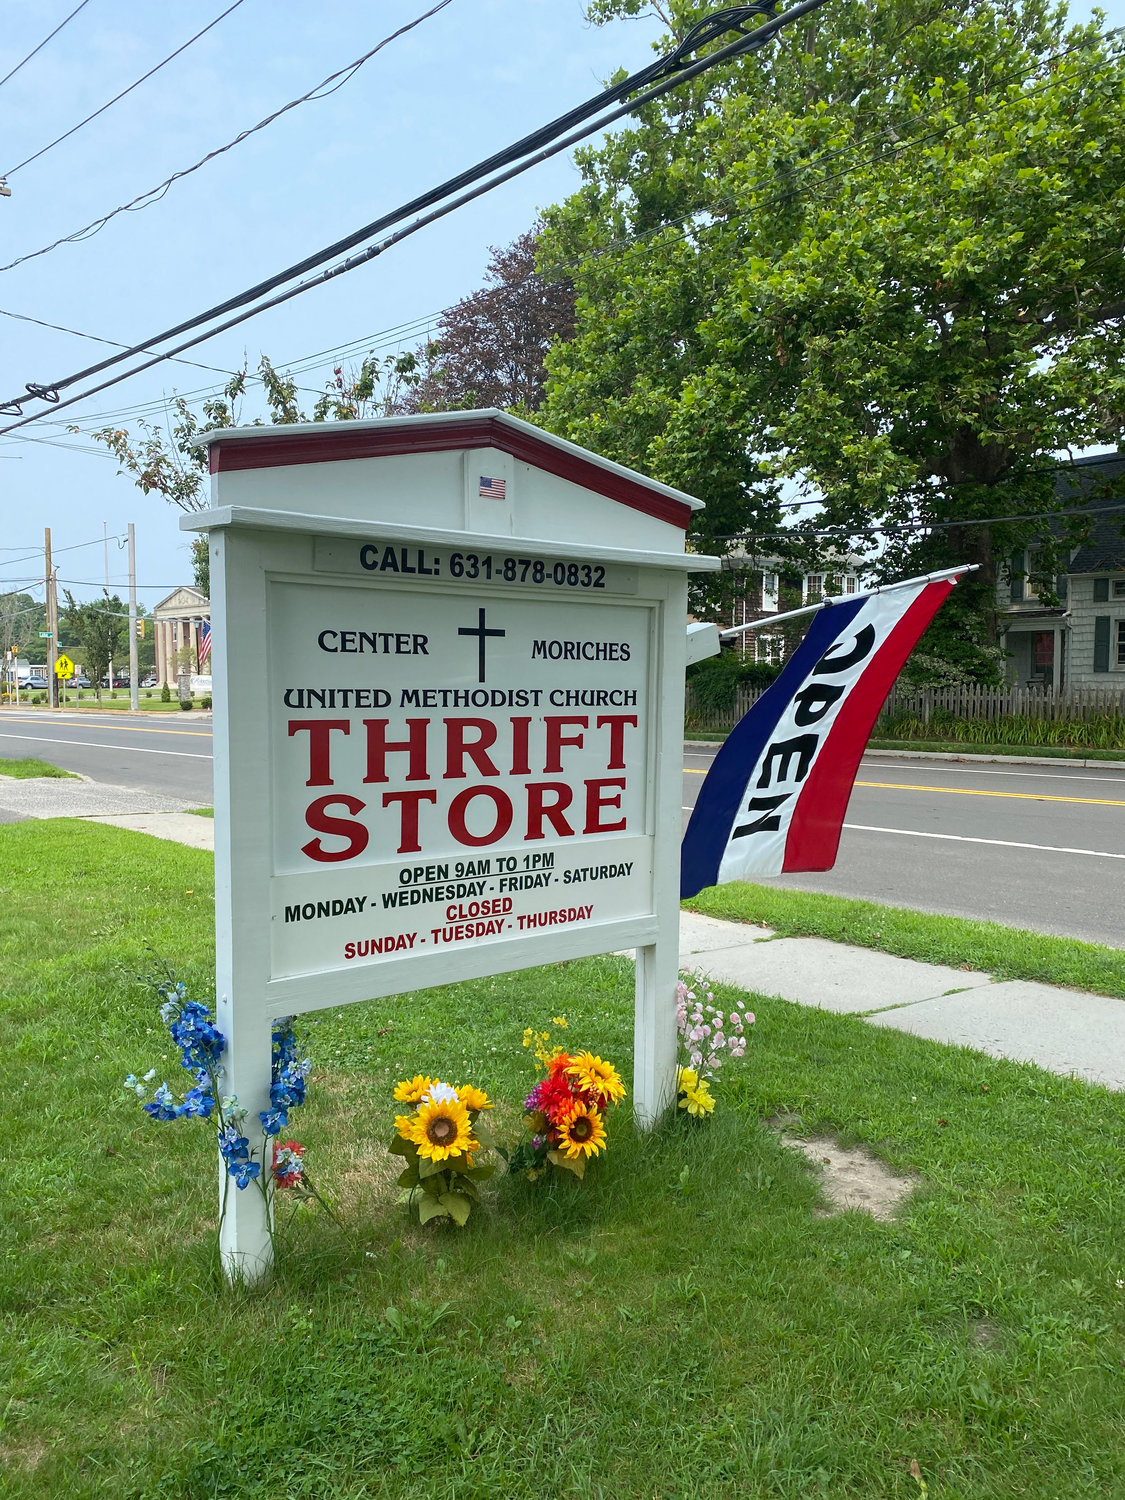 A sign for the United Methodist Church Thrift Store